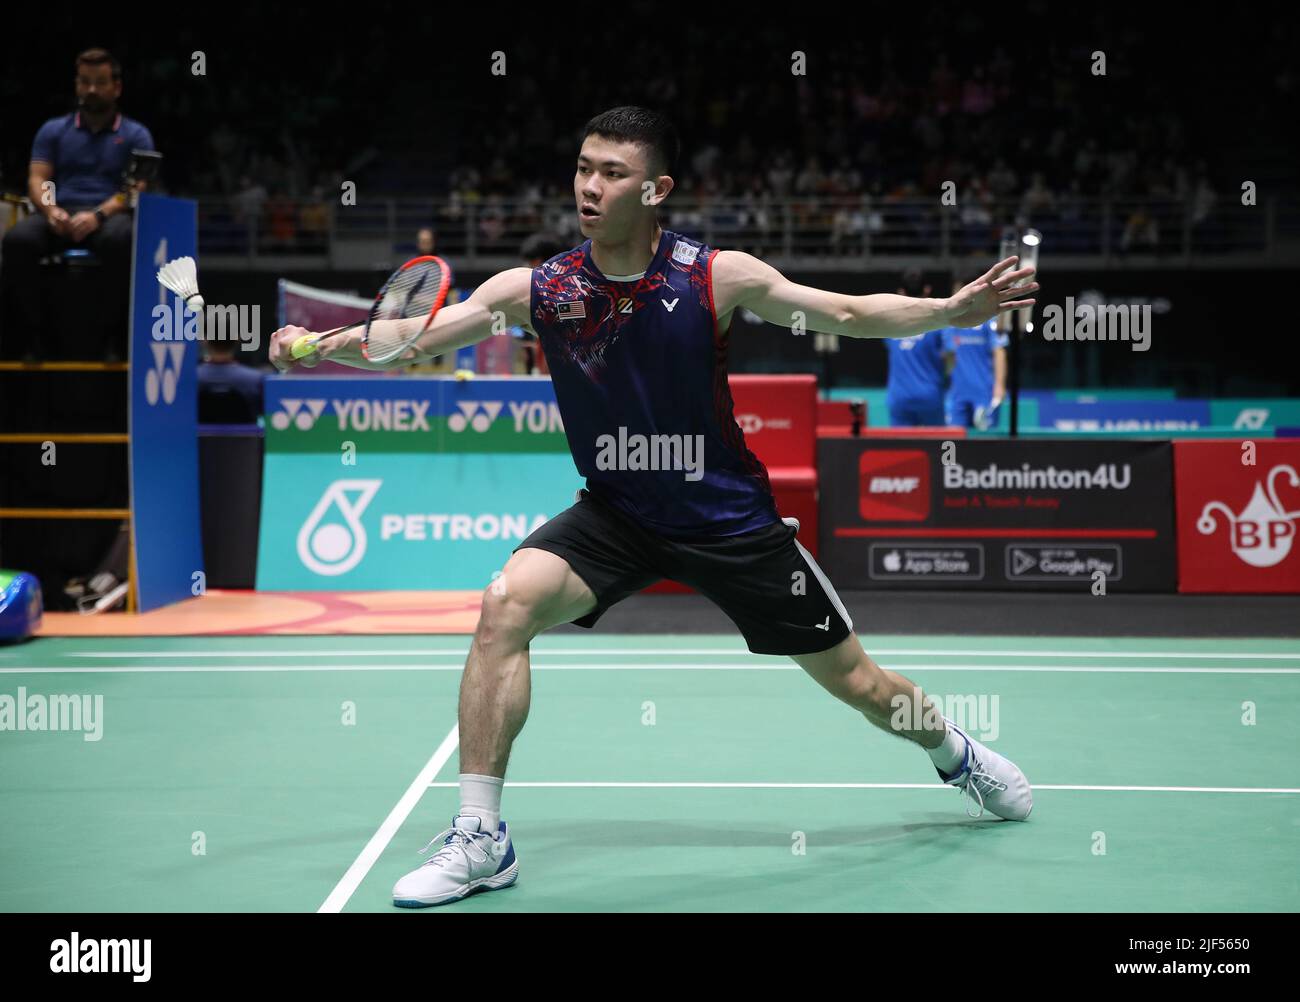 Lee Zii Jia of Malaysia plays against Dwi Wardoyo Chico Aura of Indonesia during the team final of the mens singles match at the Badminton Asia Team Championships 2022 in Shah Alam